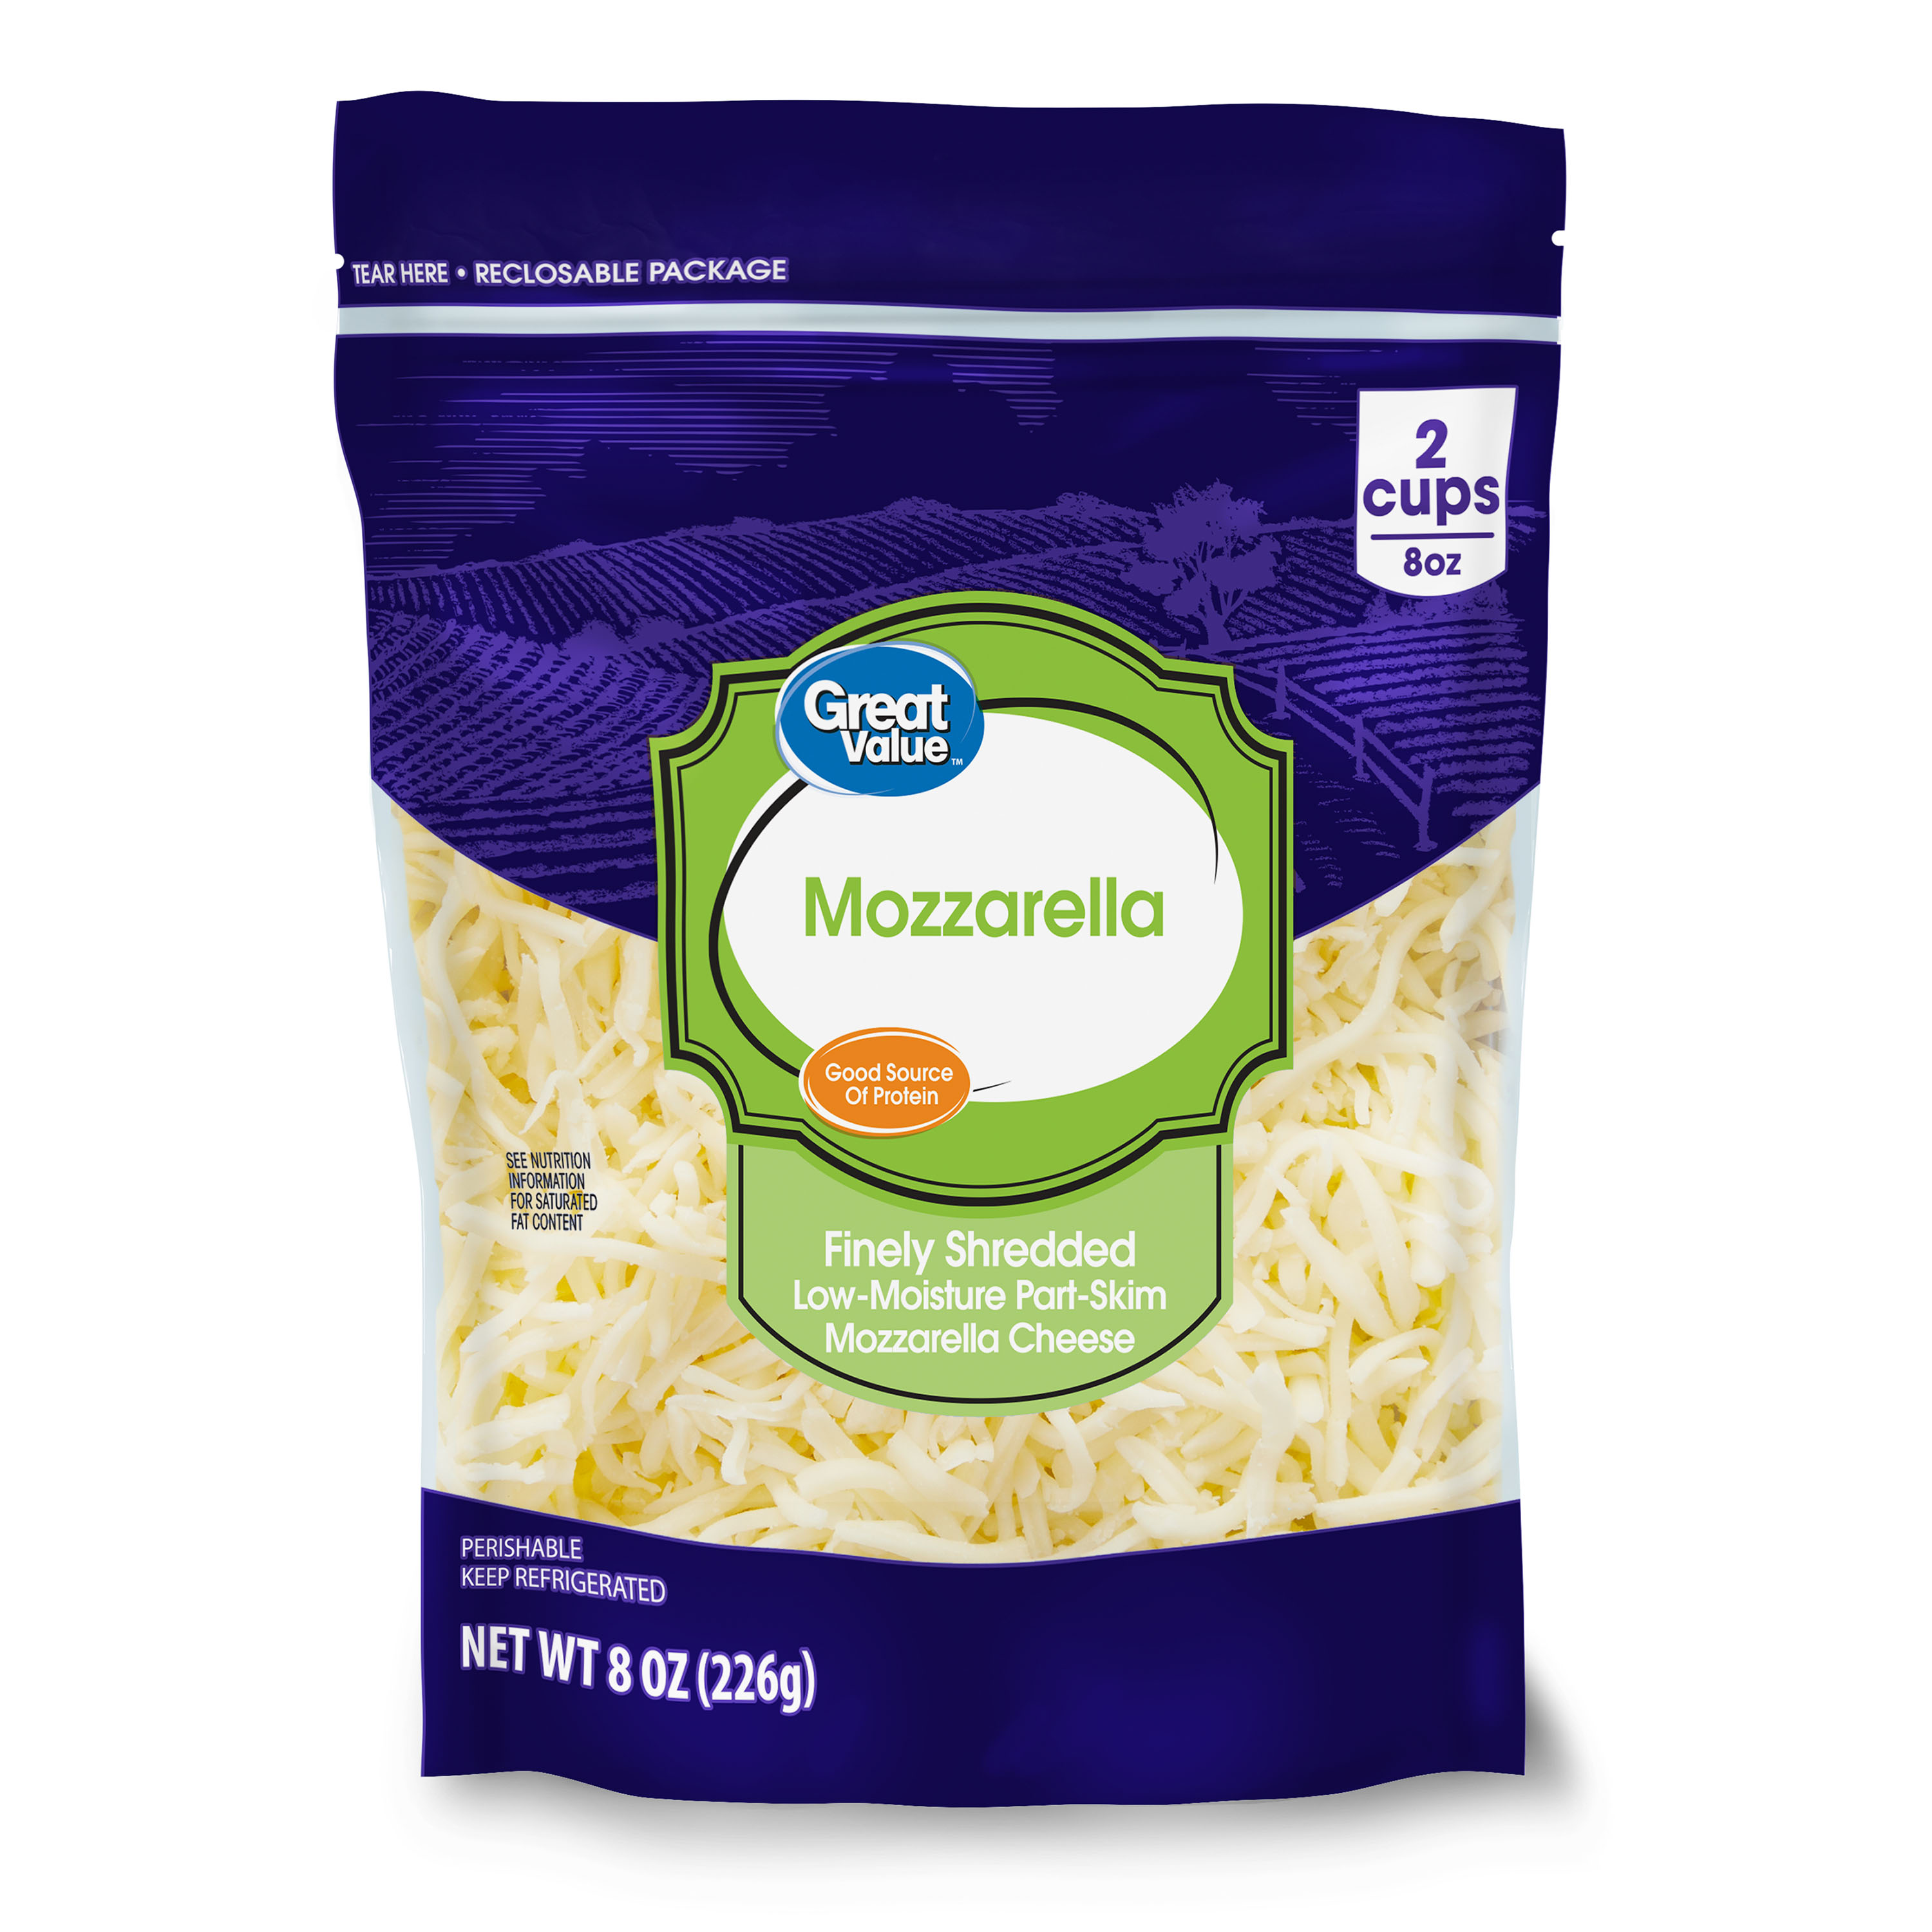 Great Value Finely Shredded Low-Moisture Part-Skim Mozzarella Cheese, 8 oz Bag - image 1 of 9